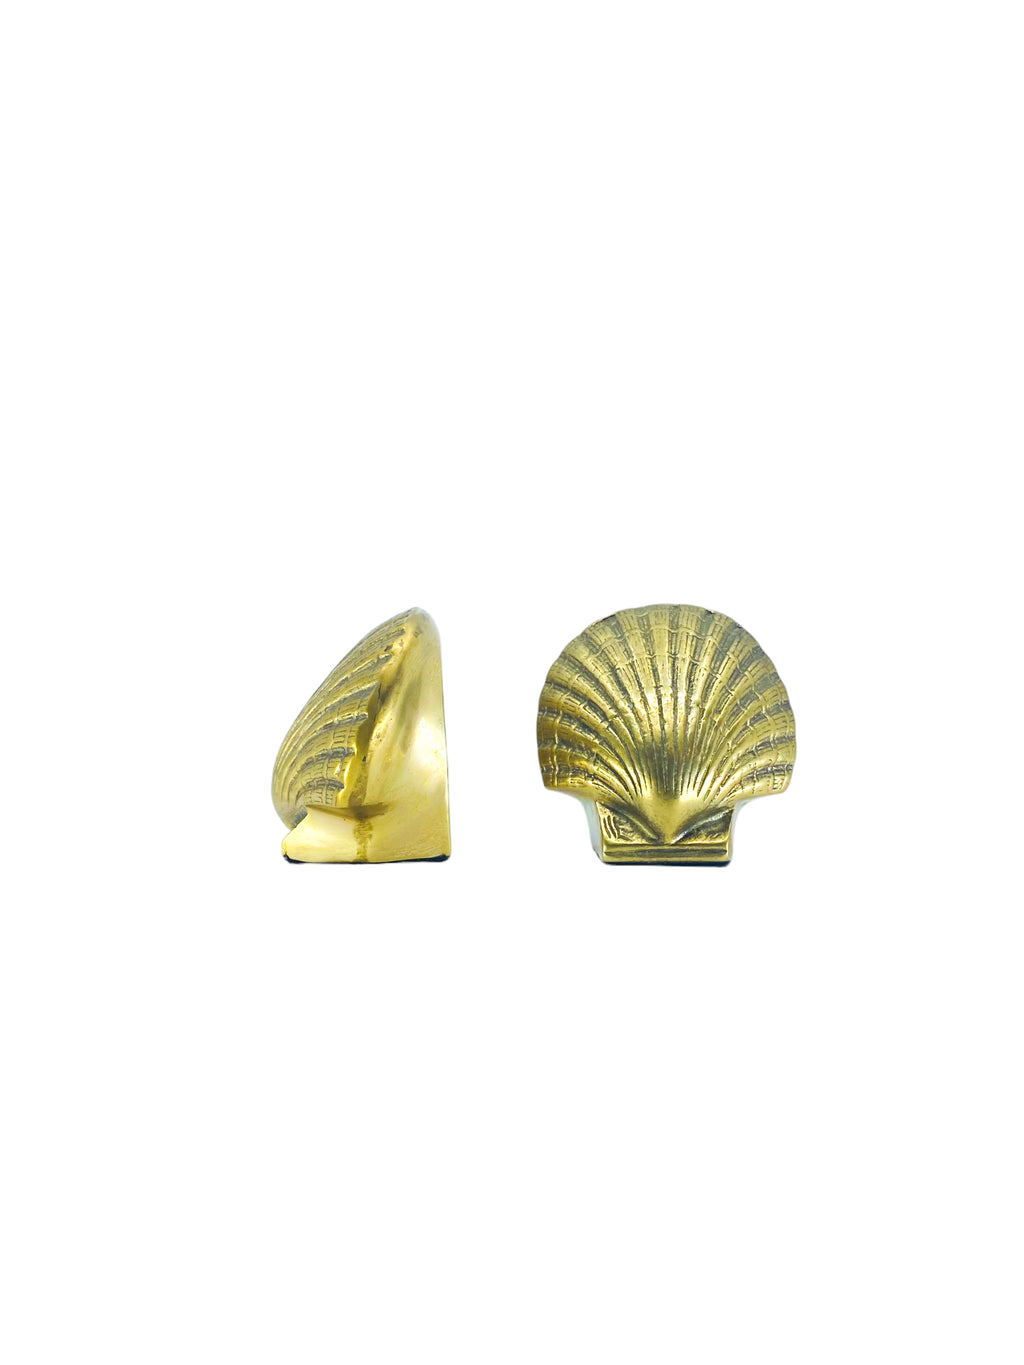 Solid Brass Shell Bookends